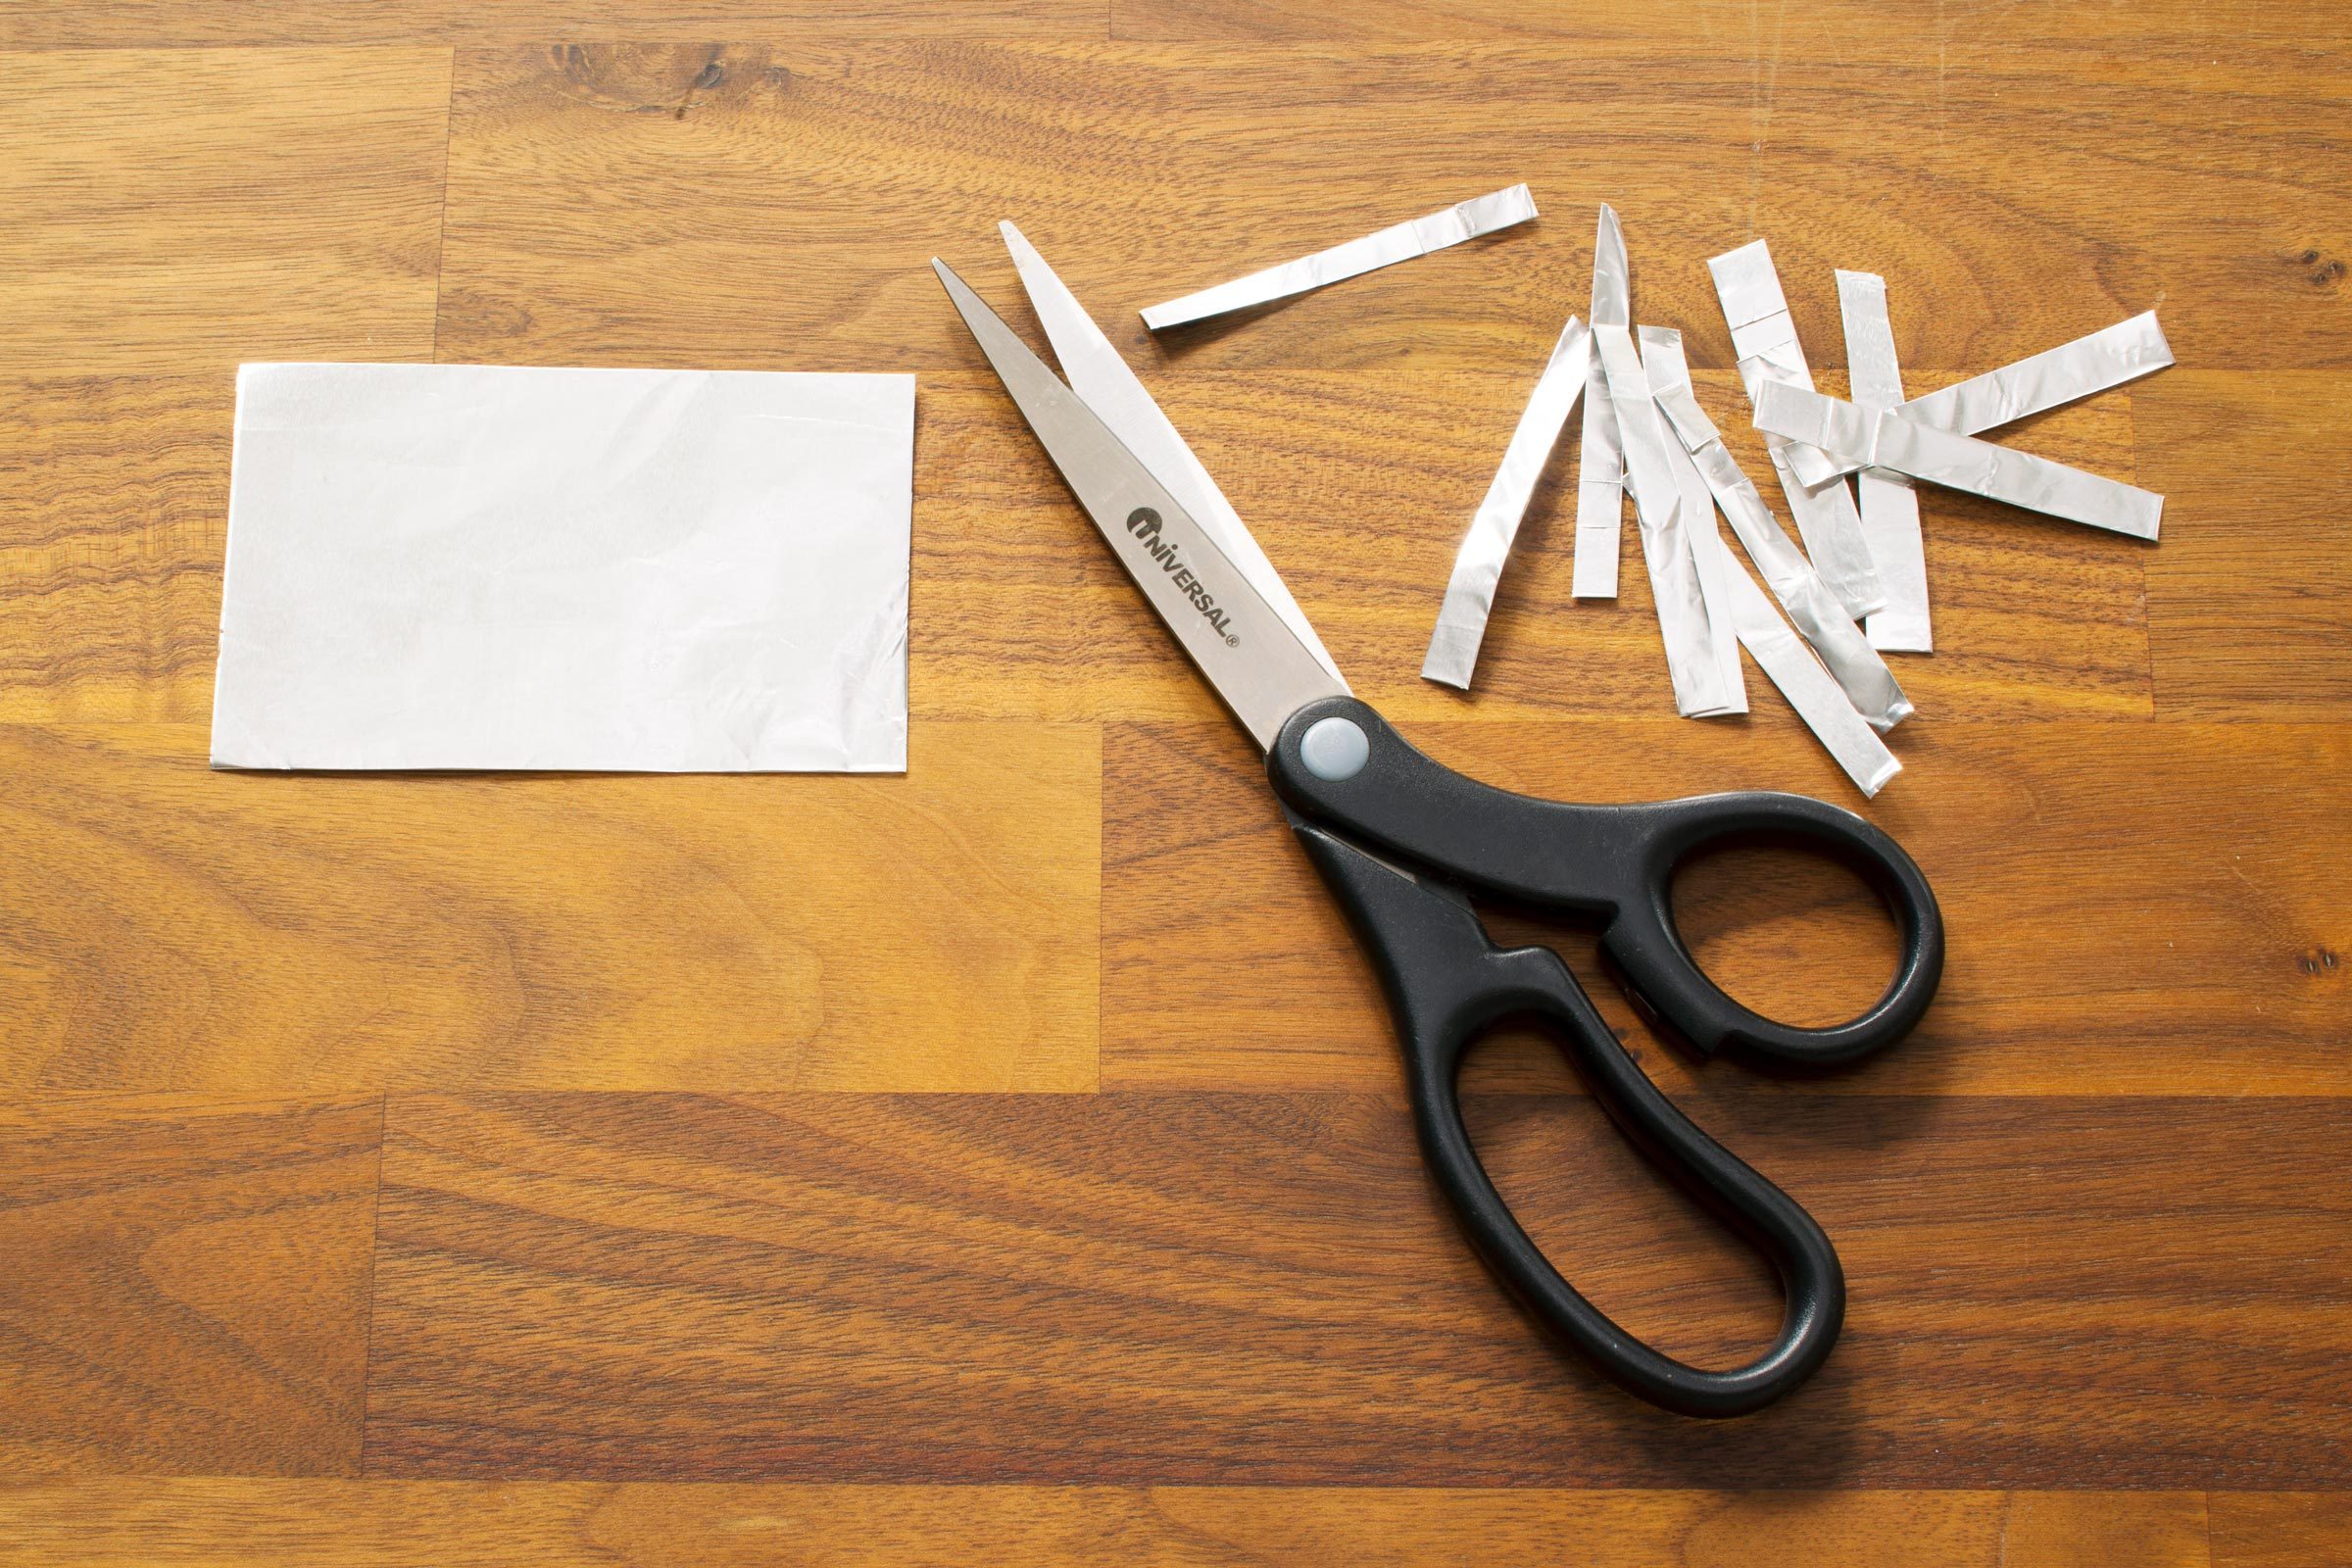 sharpening scissors with strips of foil